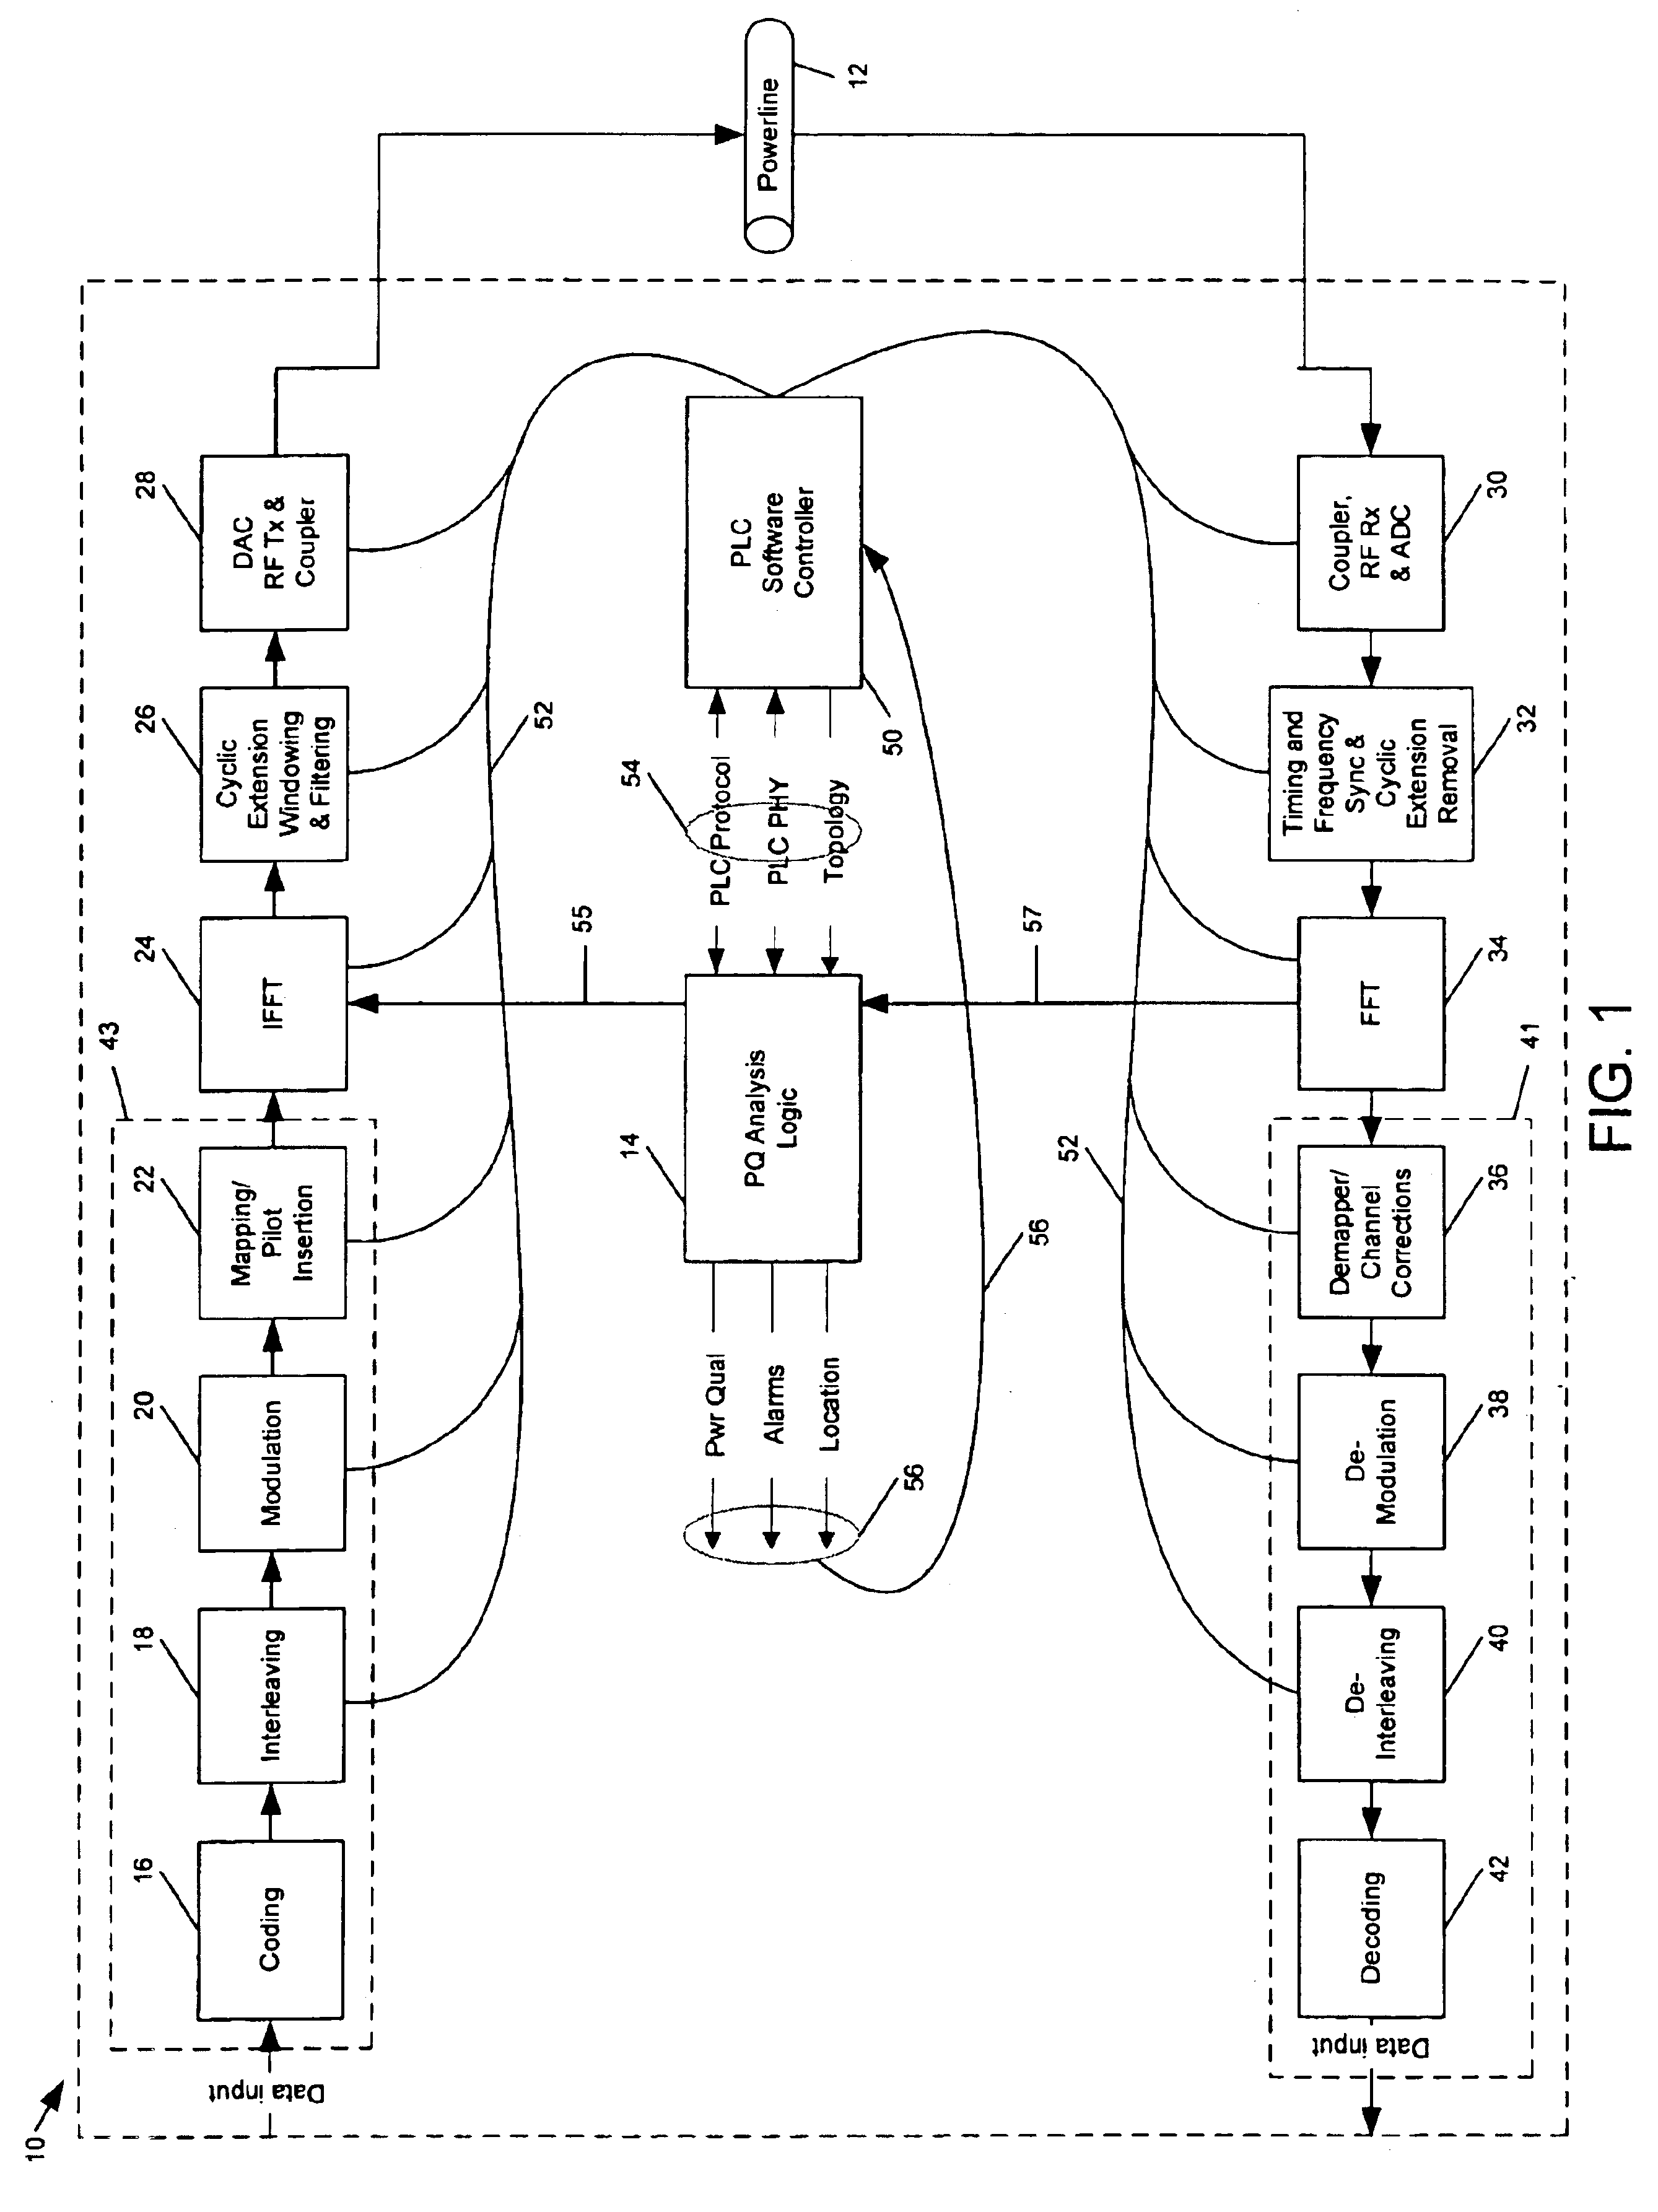 Method and system for power line network fault detection and quality monitoring